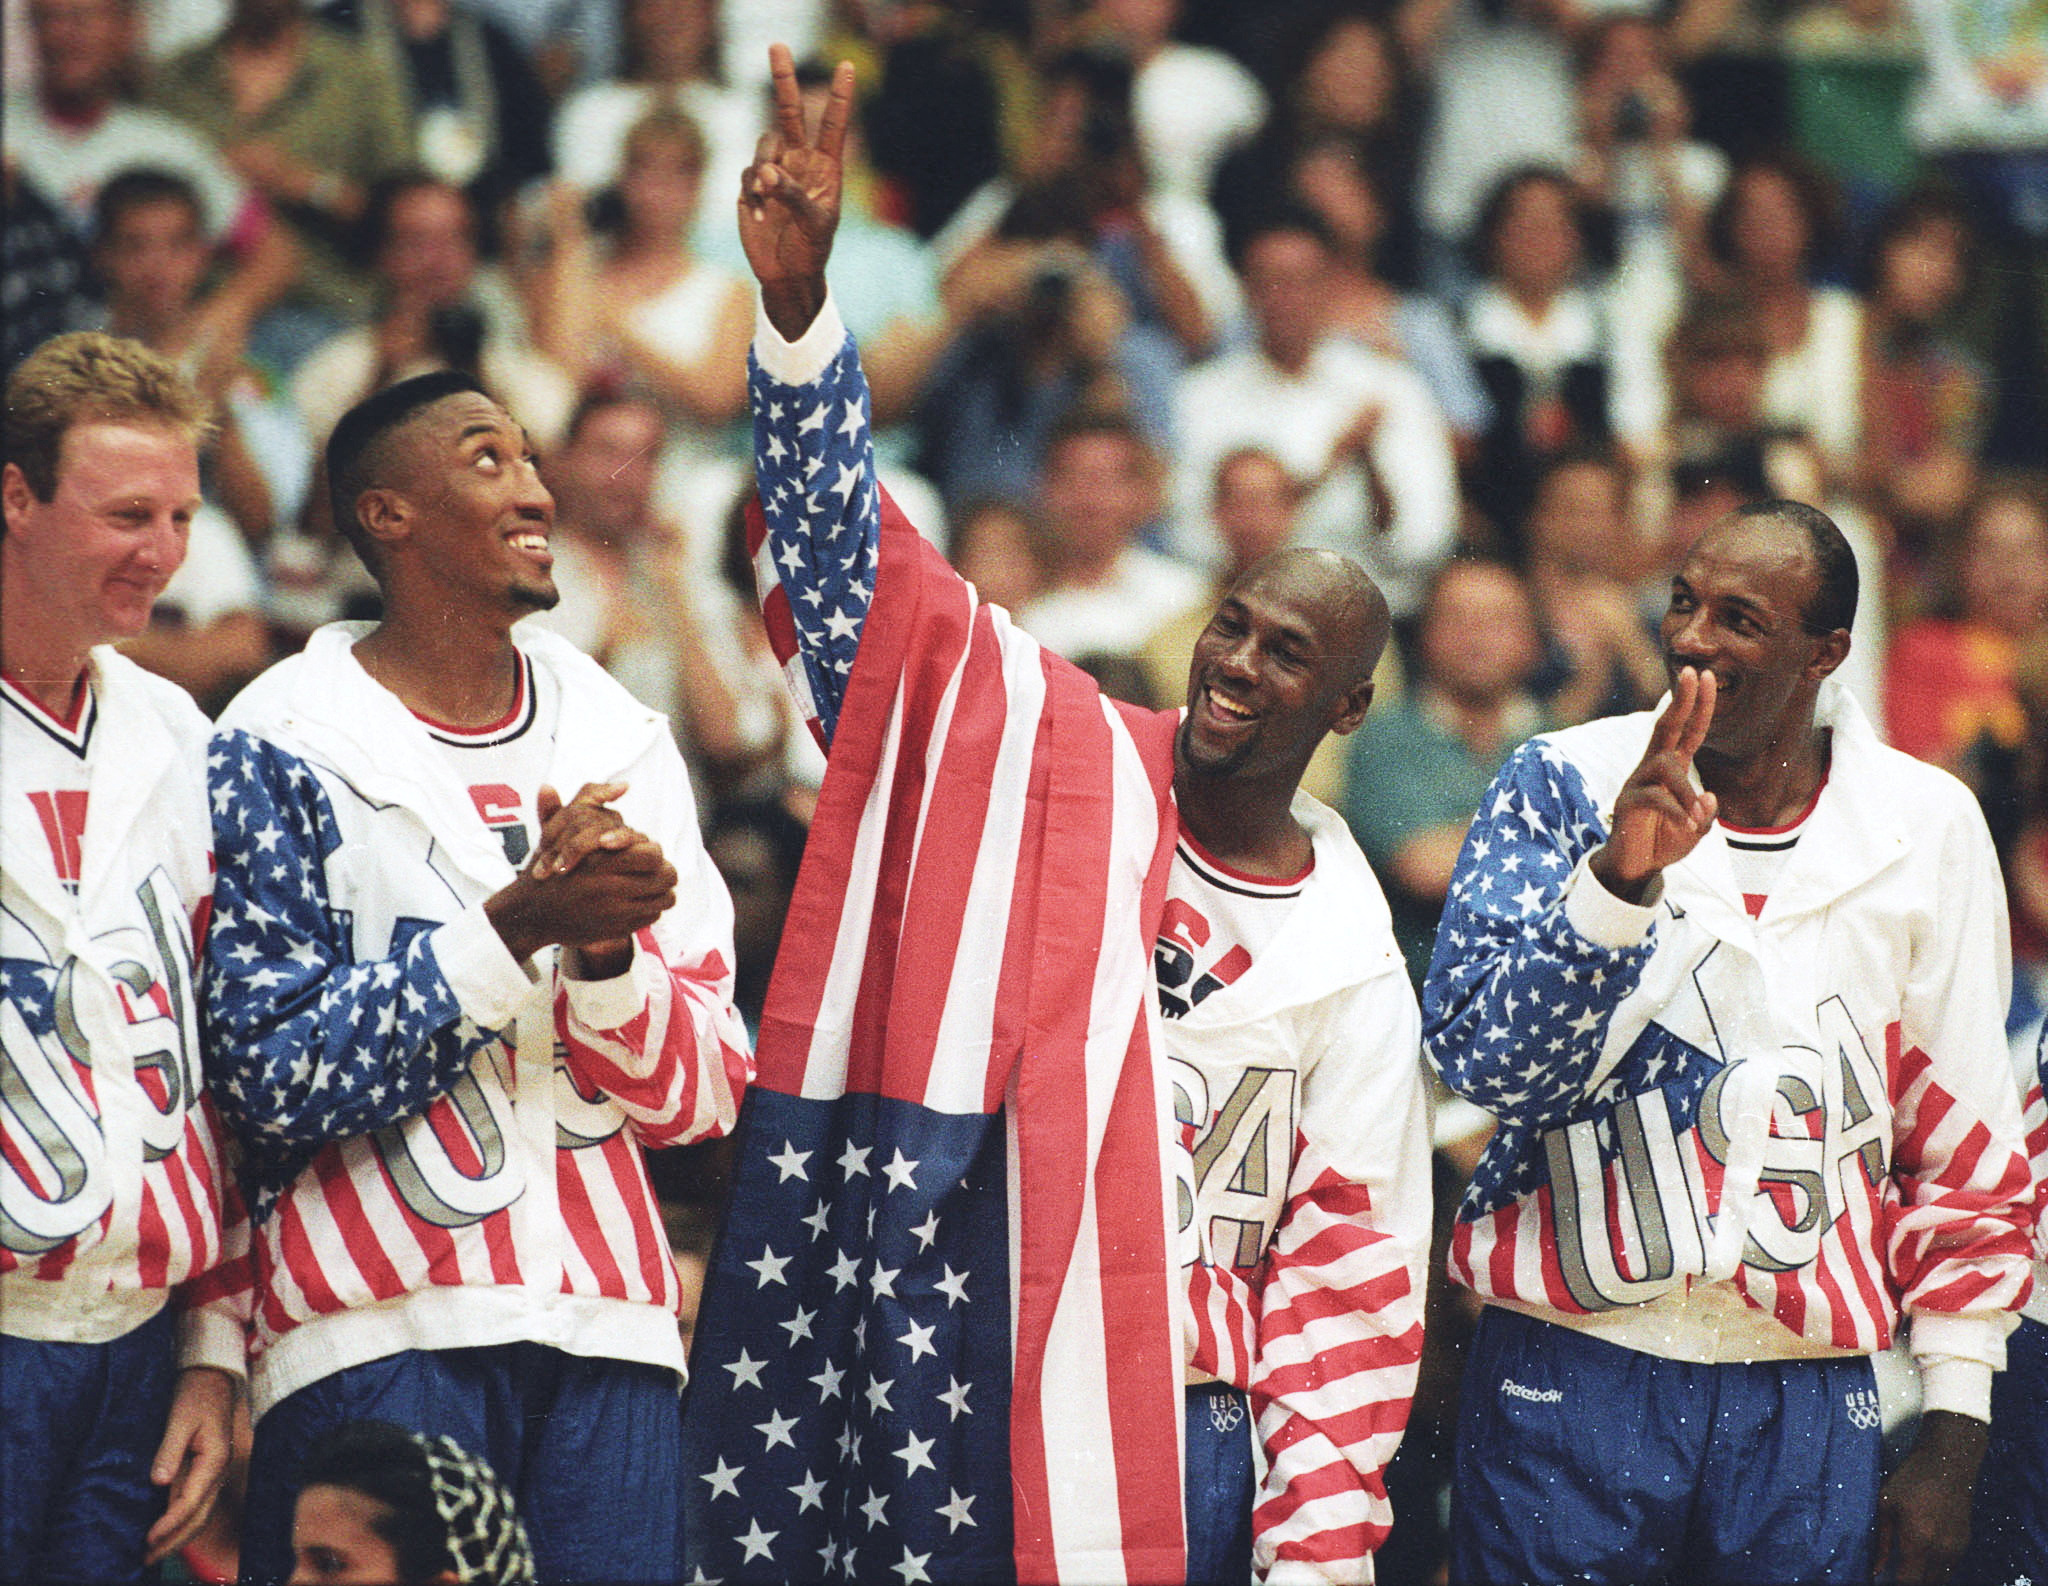 U.S. basketball player Michael Jordan flashes a victory sign as he stands with team mates Larry Bird, Scottie Pippen and Clyde Drexler after winning the Olympic gold in Barcelona